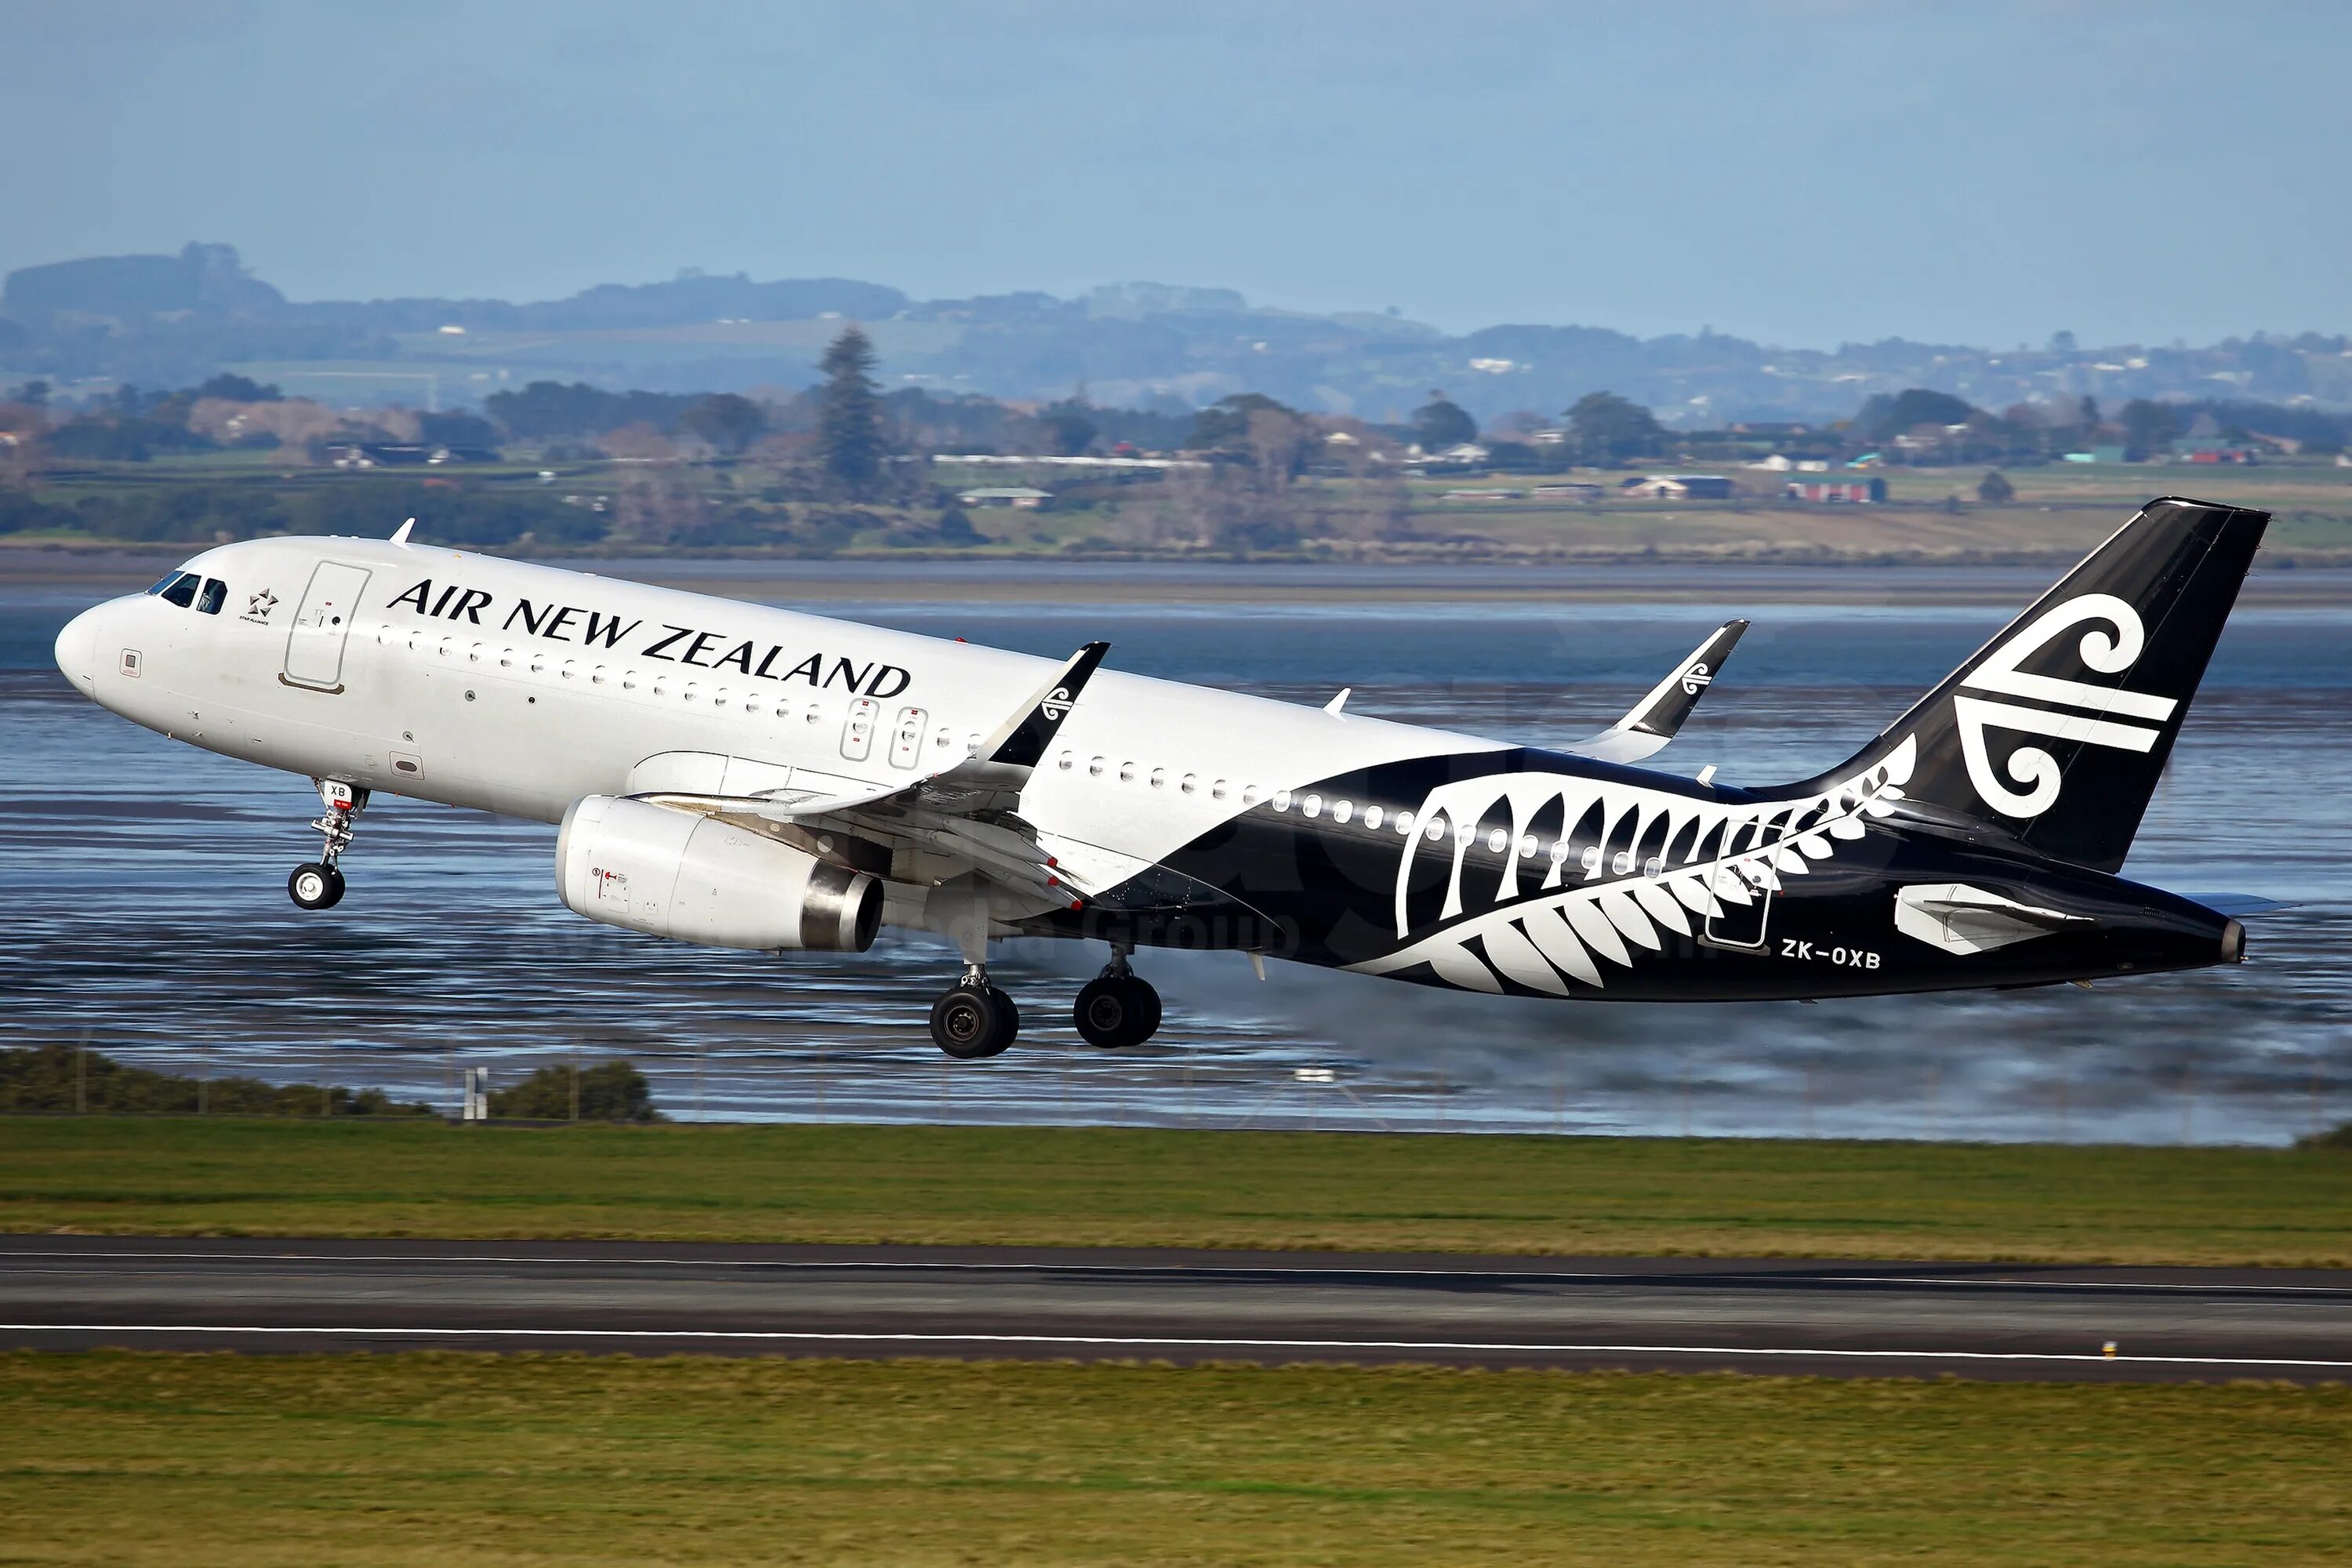 Air new zealand. A320neo Air New Zealand. Airbus a320 Air New Zealand. A320 Air Zeland. Air New Zealand Эйрбас а320.